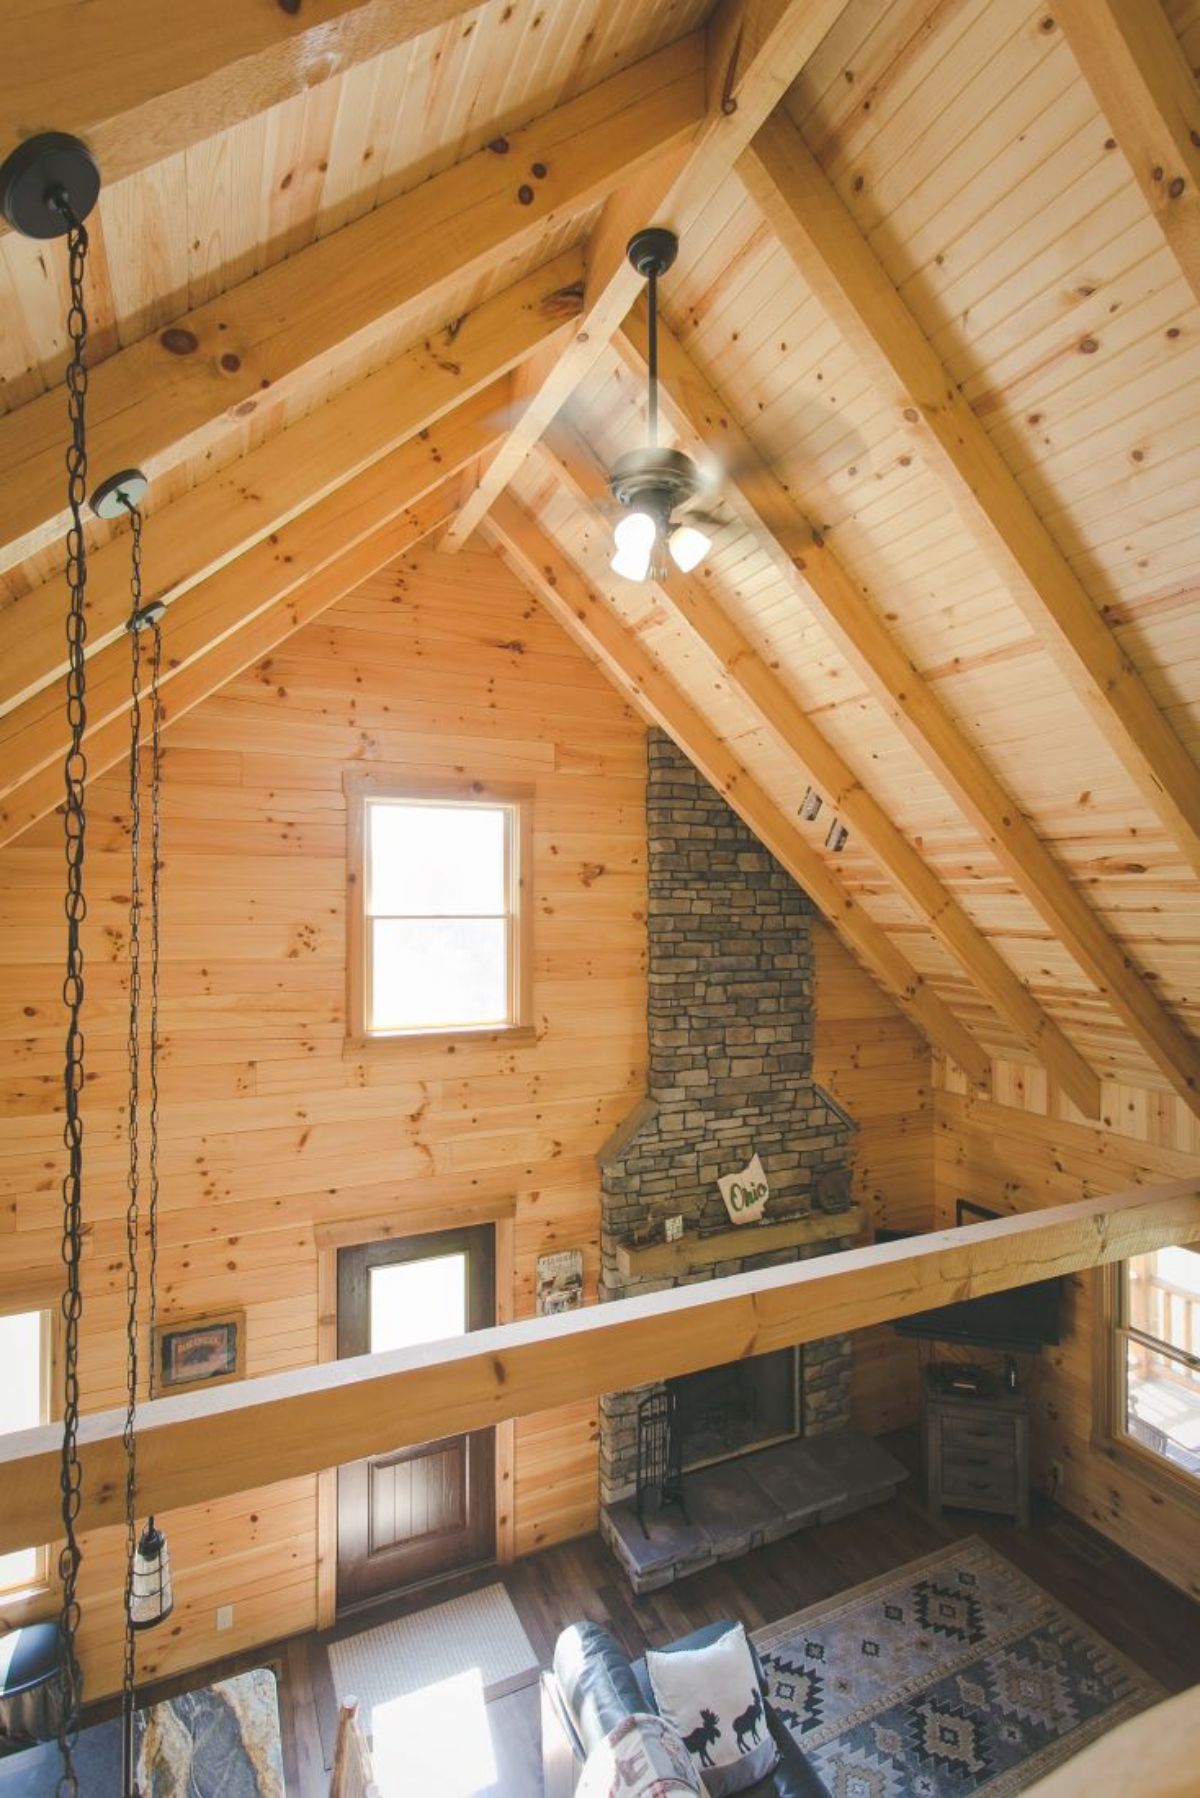 view across cathedral ceiling in log cabin showing stone fireplace on right side